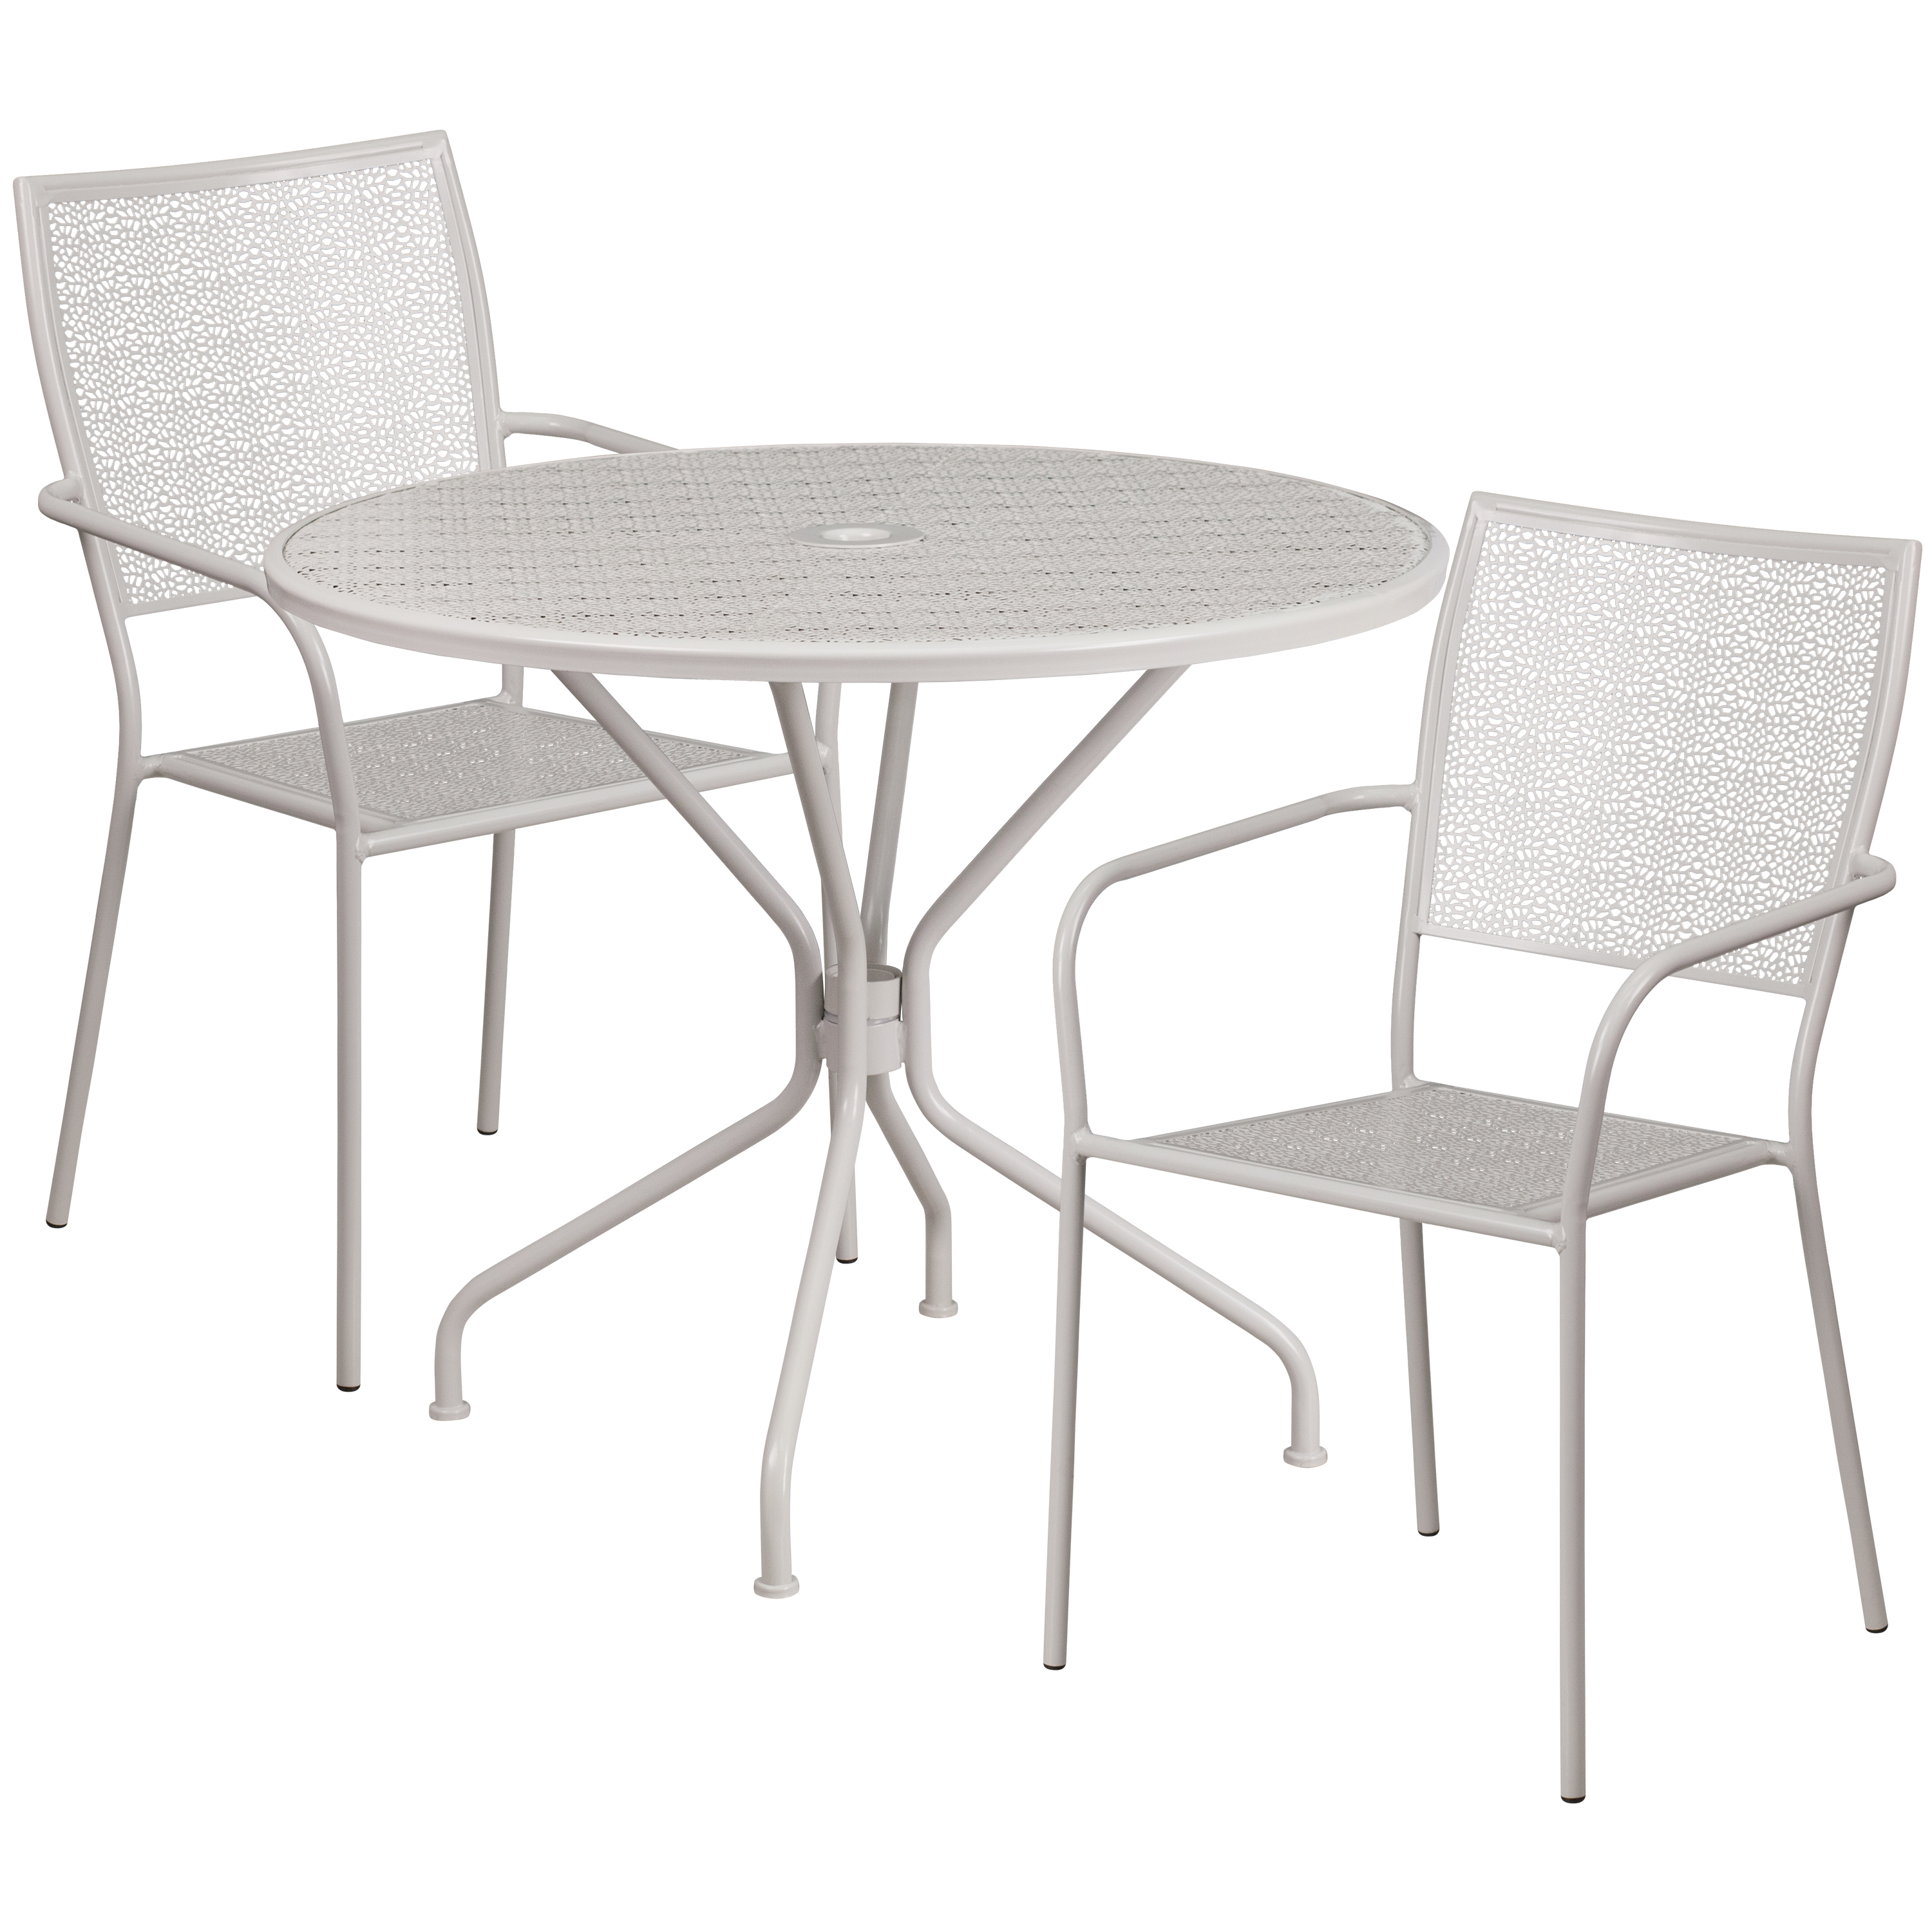 Flash Furniture Commercial Grade 35.25" Round Light Gray Indoor-Outdoor Steel Patio Table Set with 2 Square Back Chairs - image 1 of 5